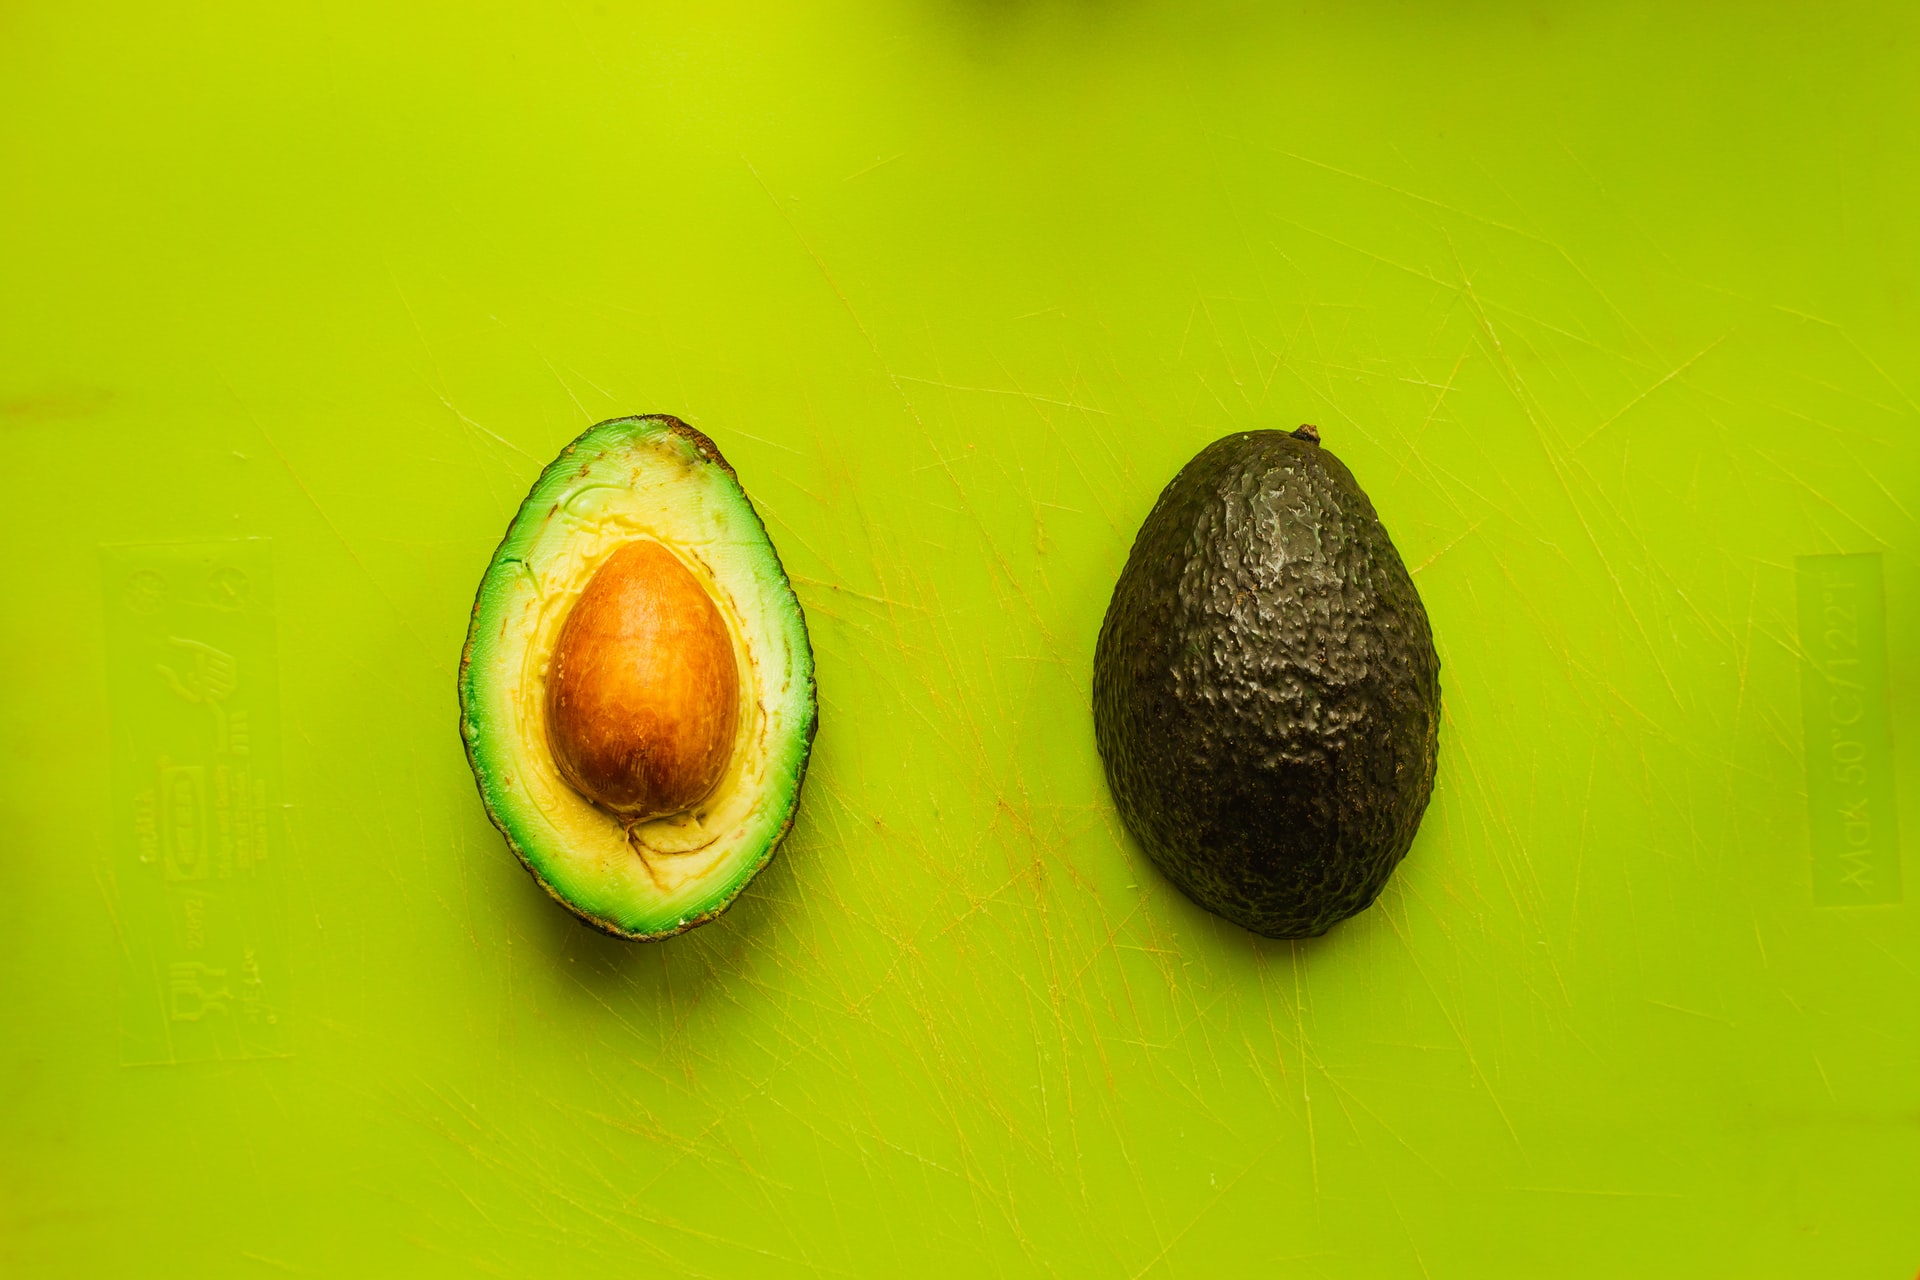 How to Plant Your First Avocado During Quarantine 1